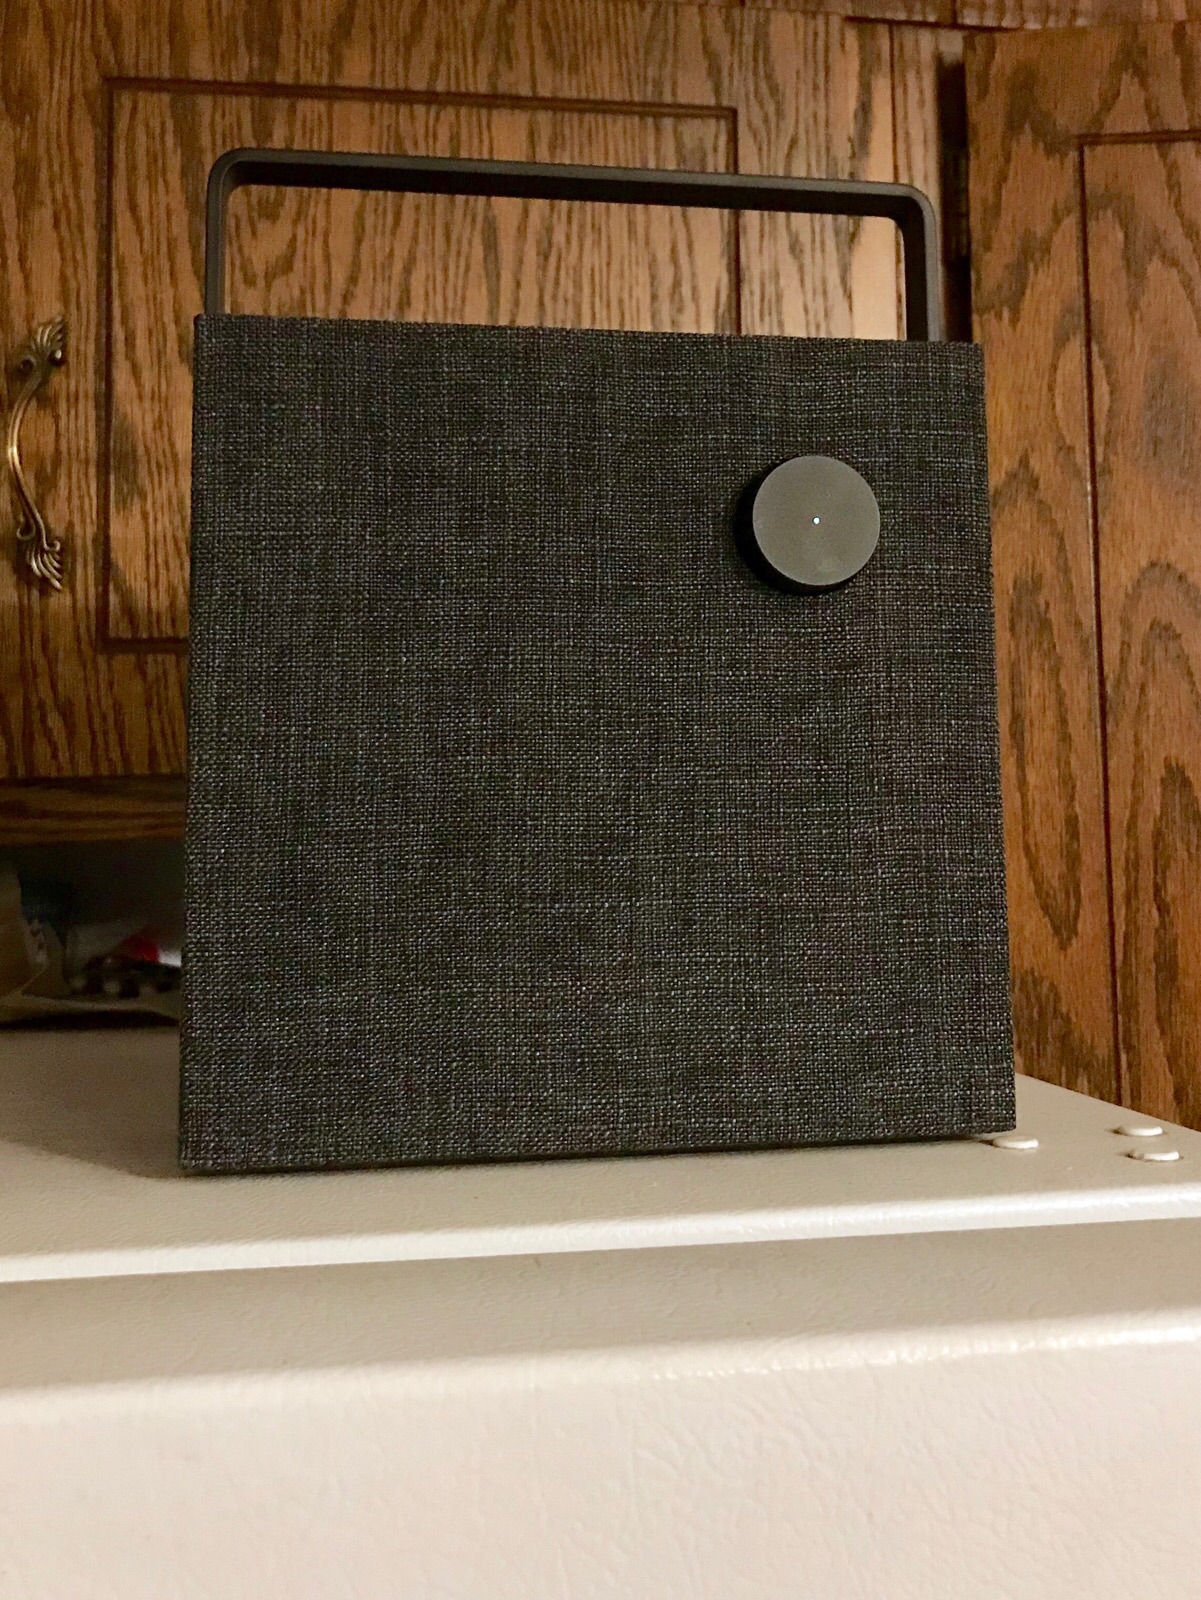 The speaker fits very nicely on top of our refigerator